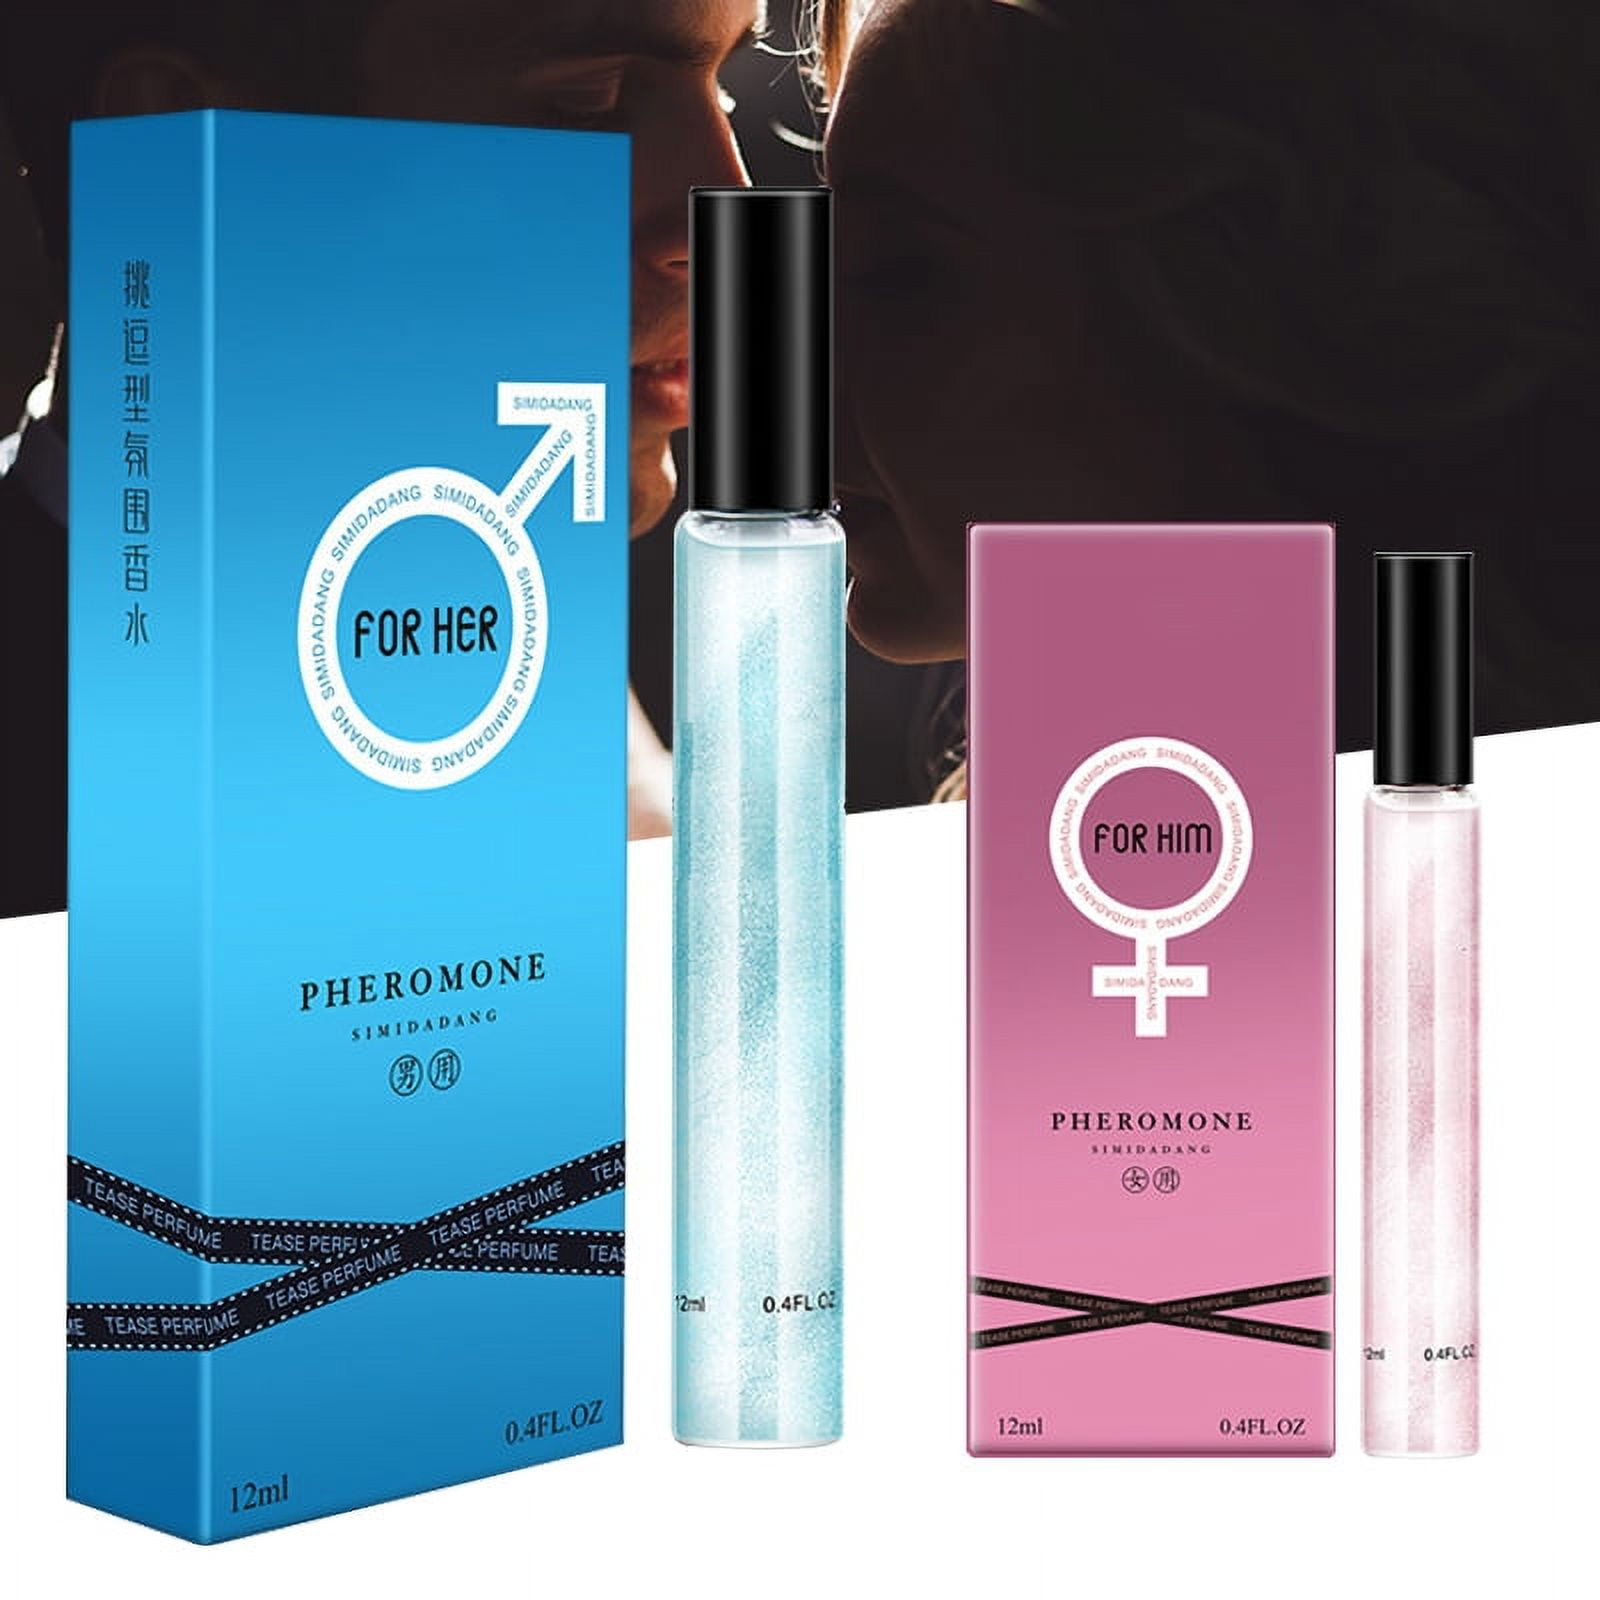  Sex Pheromone Intimate Partner Perfume, Intimate Partner  Fragrance, Pheromone Oil for Women To Attract Men, Entice and Ensnare the  Man of Your Dreams : Health & Household